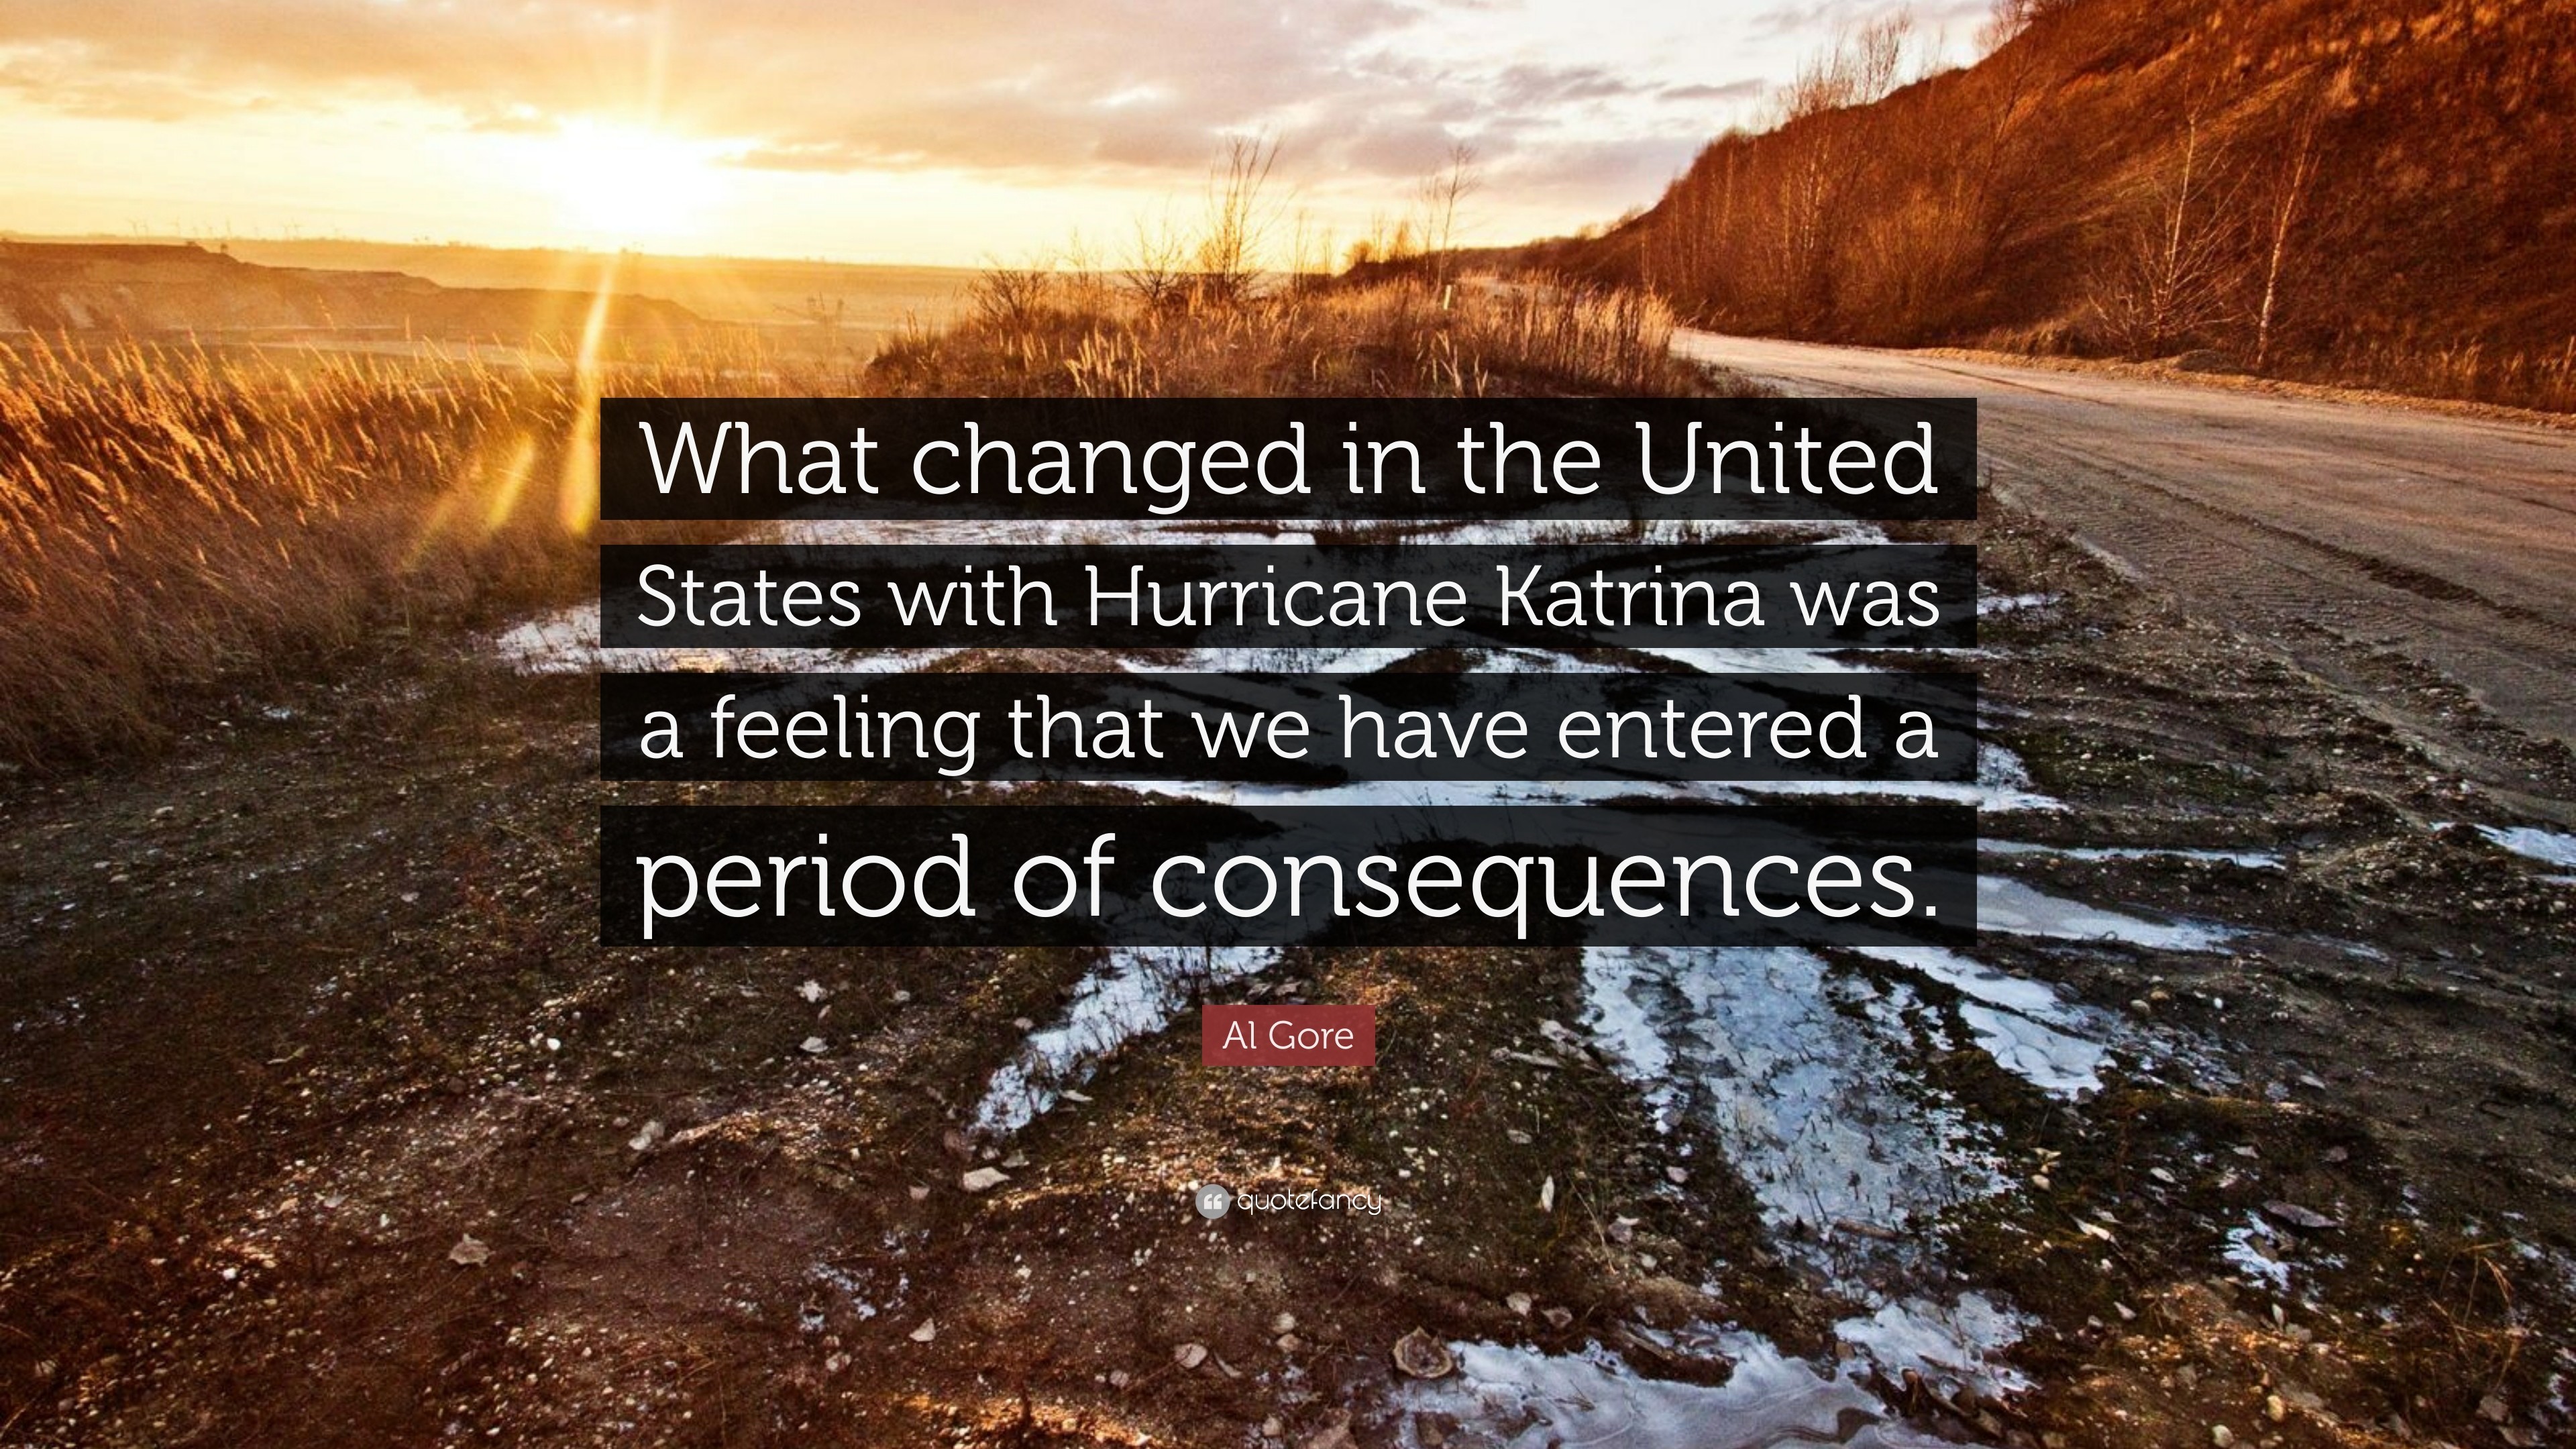 3840x2160 Al Gore Quote: “What changed in the United States with Hurricane Katrina  was a